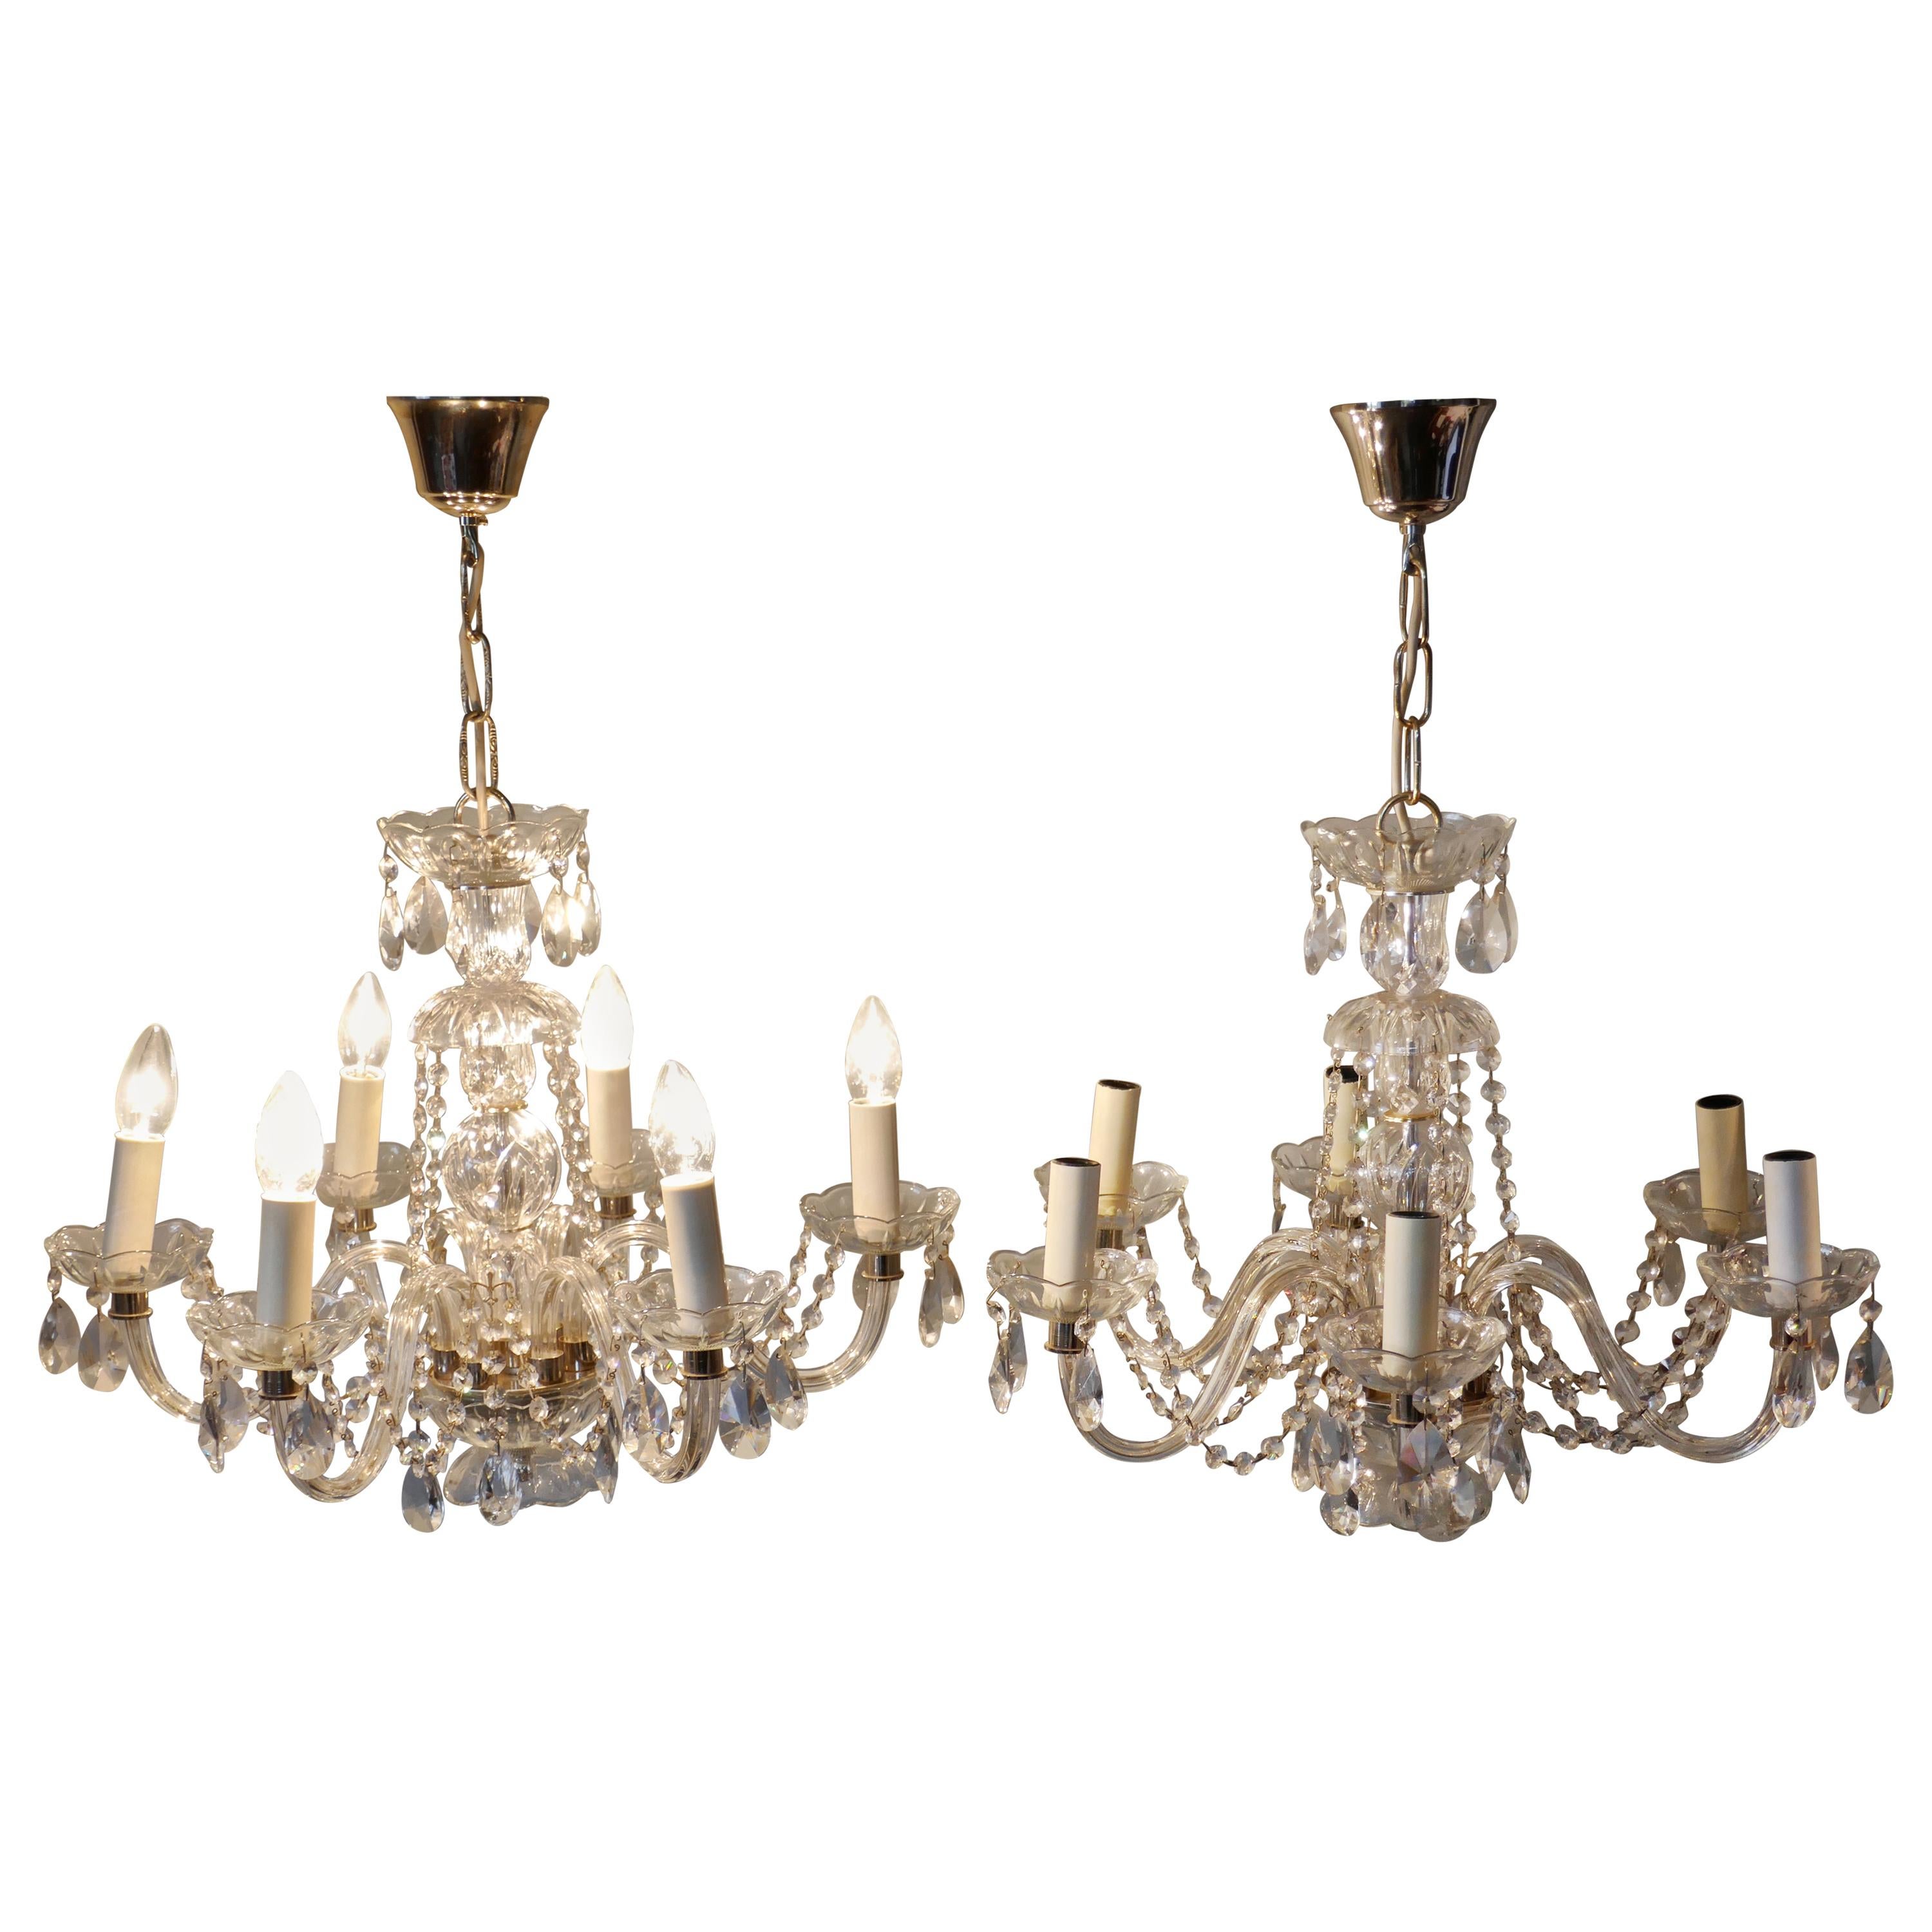 Pair of Large Rainbow Crystal 6 Branch Chandeliers